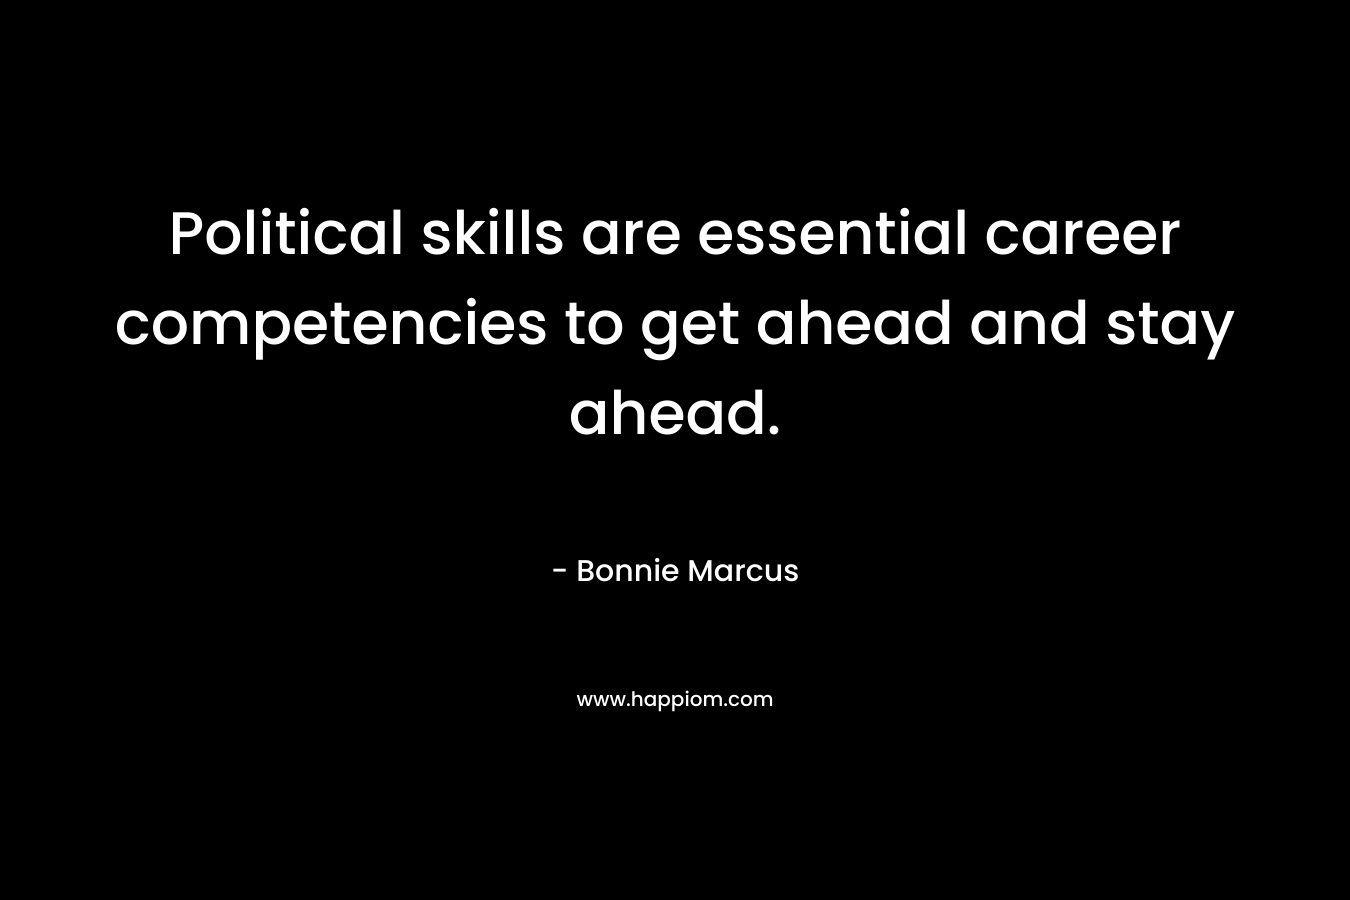 Political skills are essential career competencies to get ahead and stay ahead.